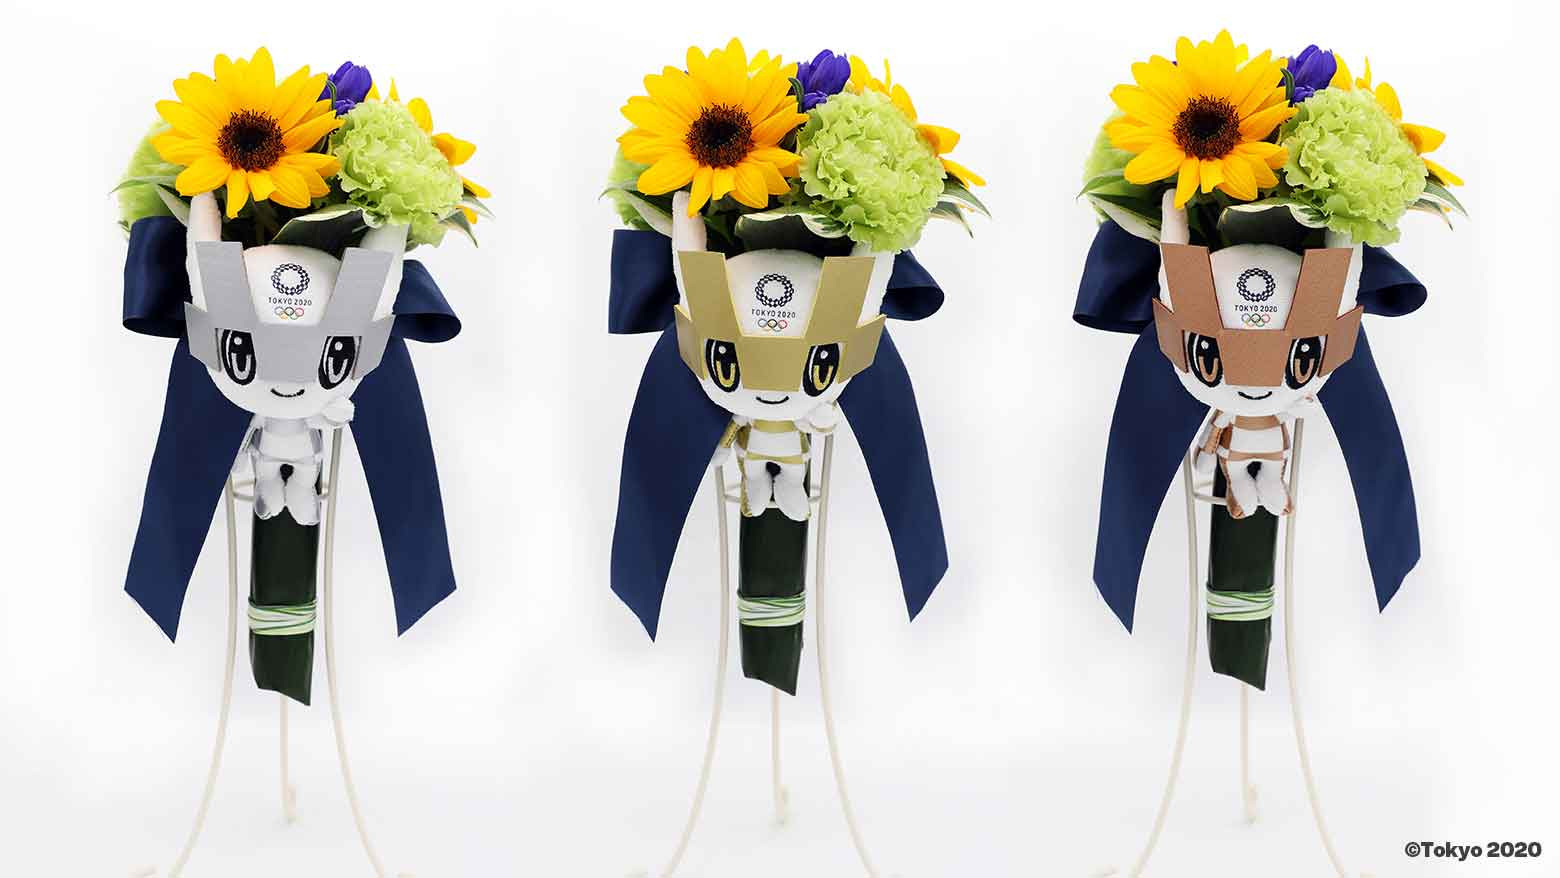 Olympic bouquets carry deep meaning for northeast Japan